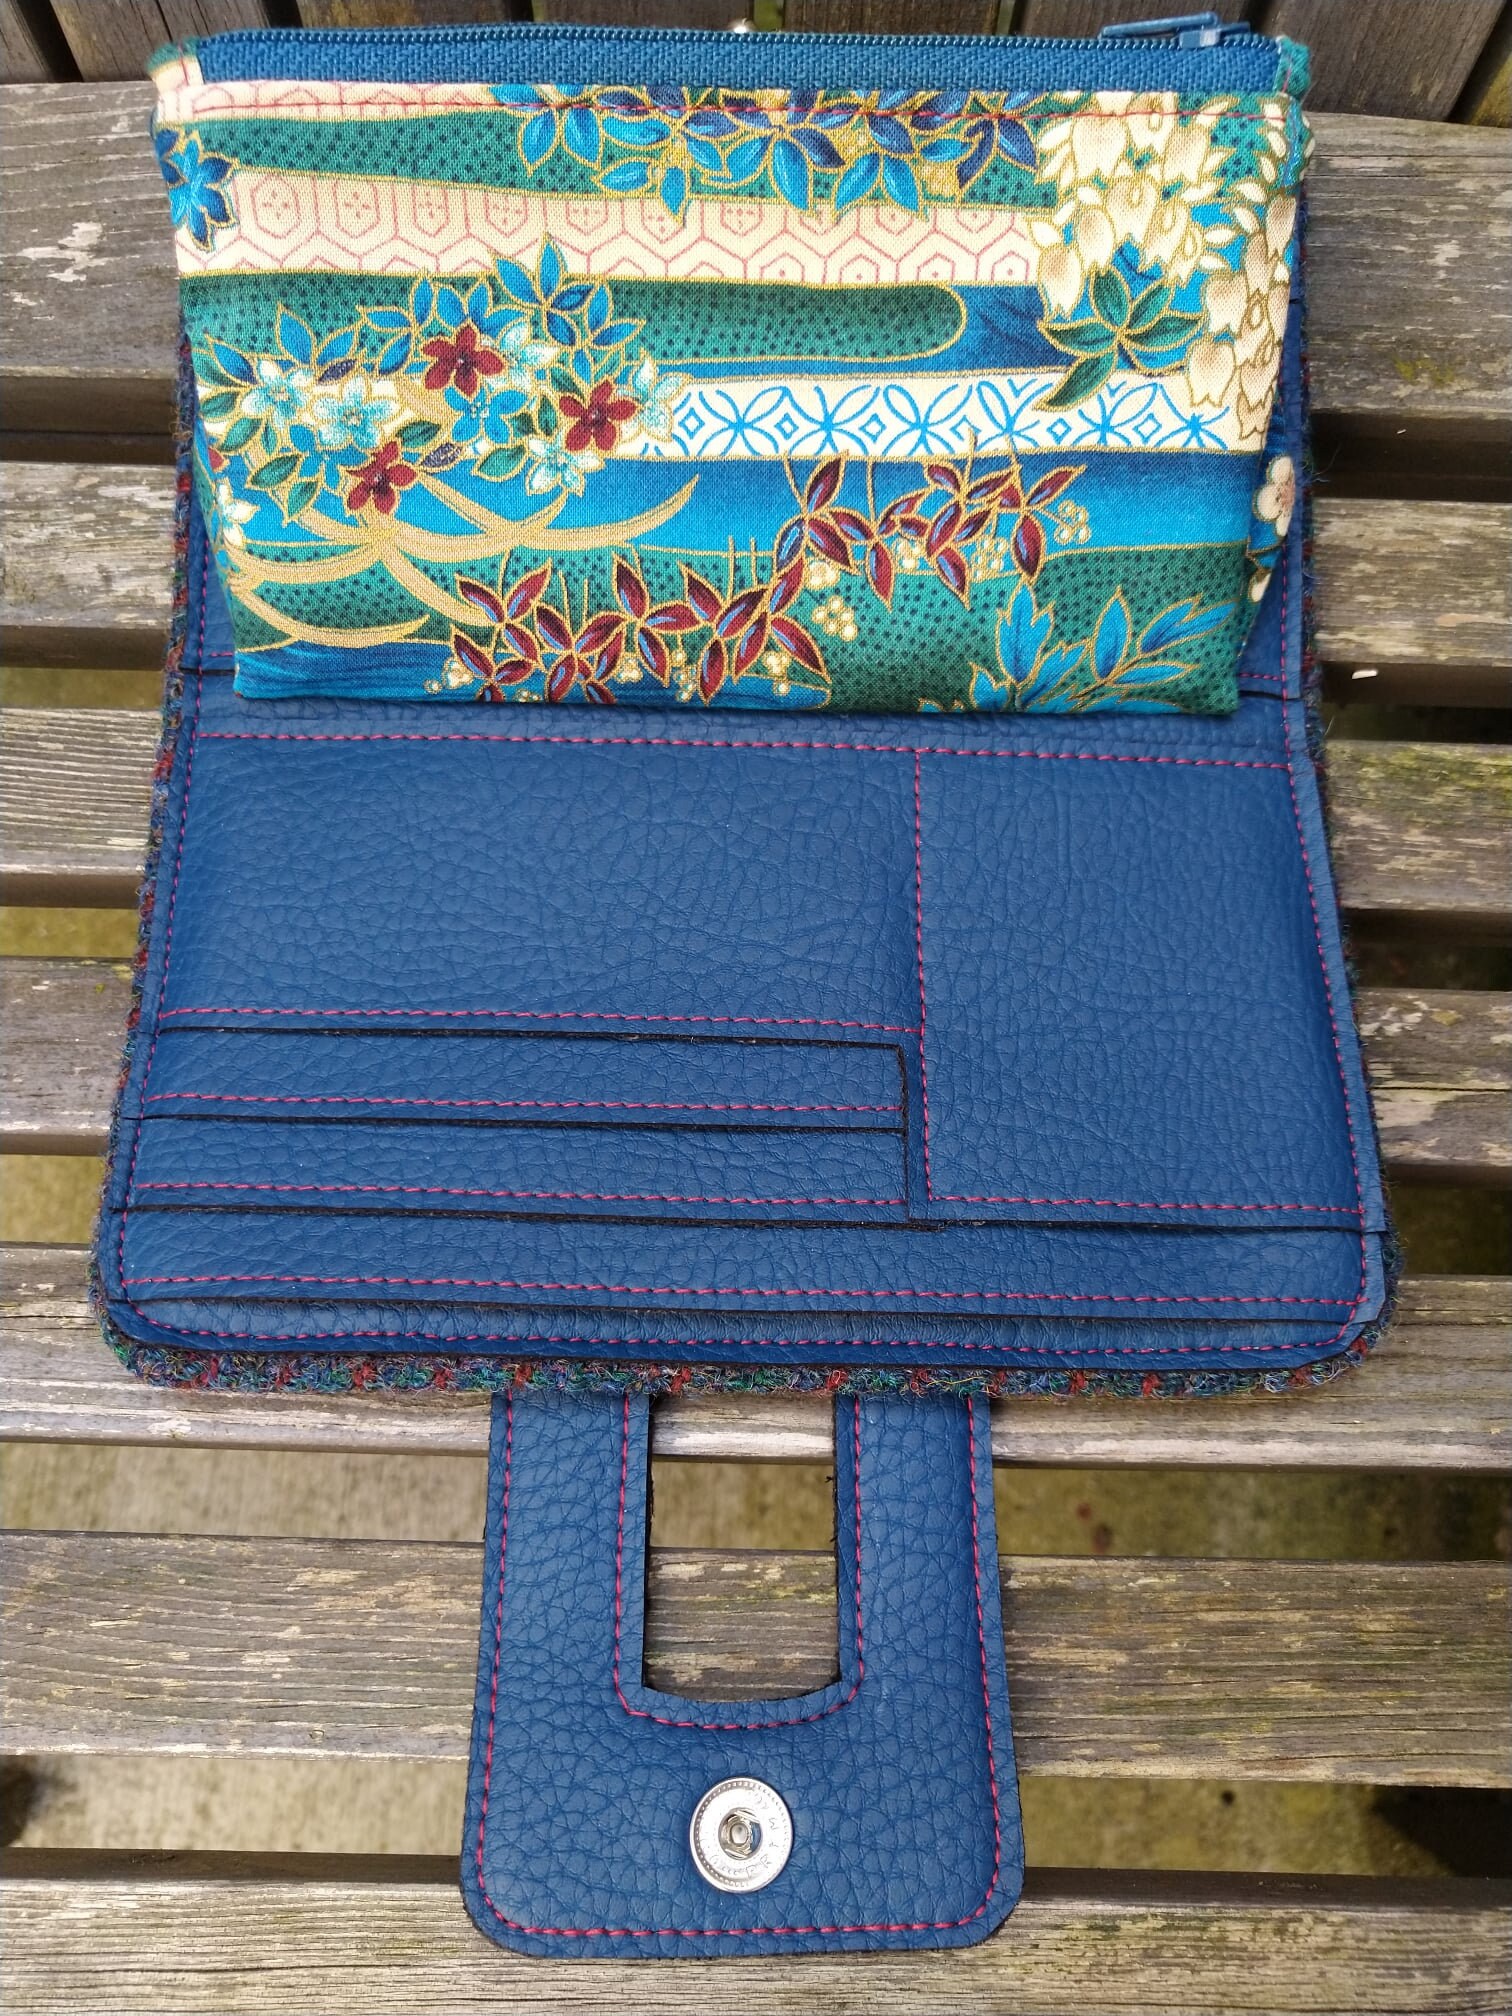 Persephone Pick'a'purse PDF Sewing Pattern With Full - Etsy